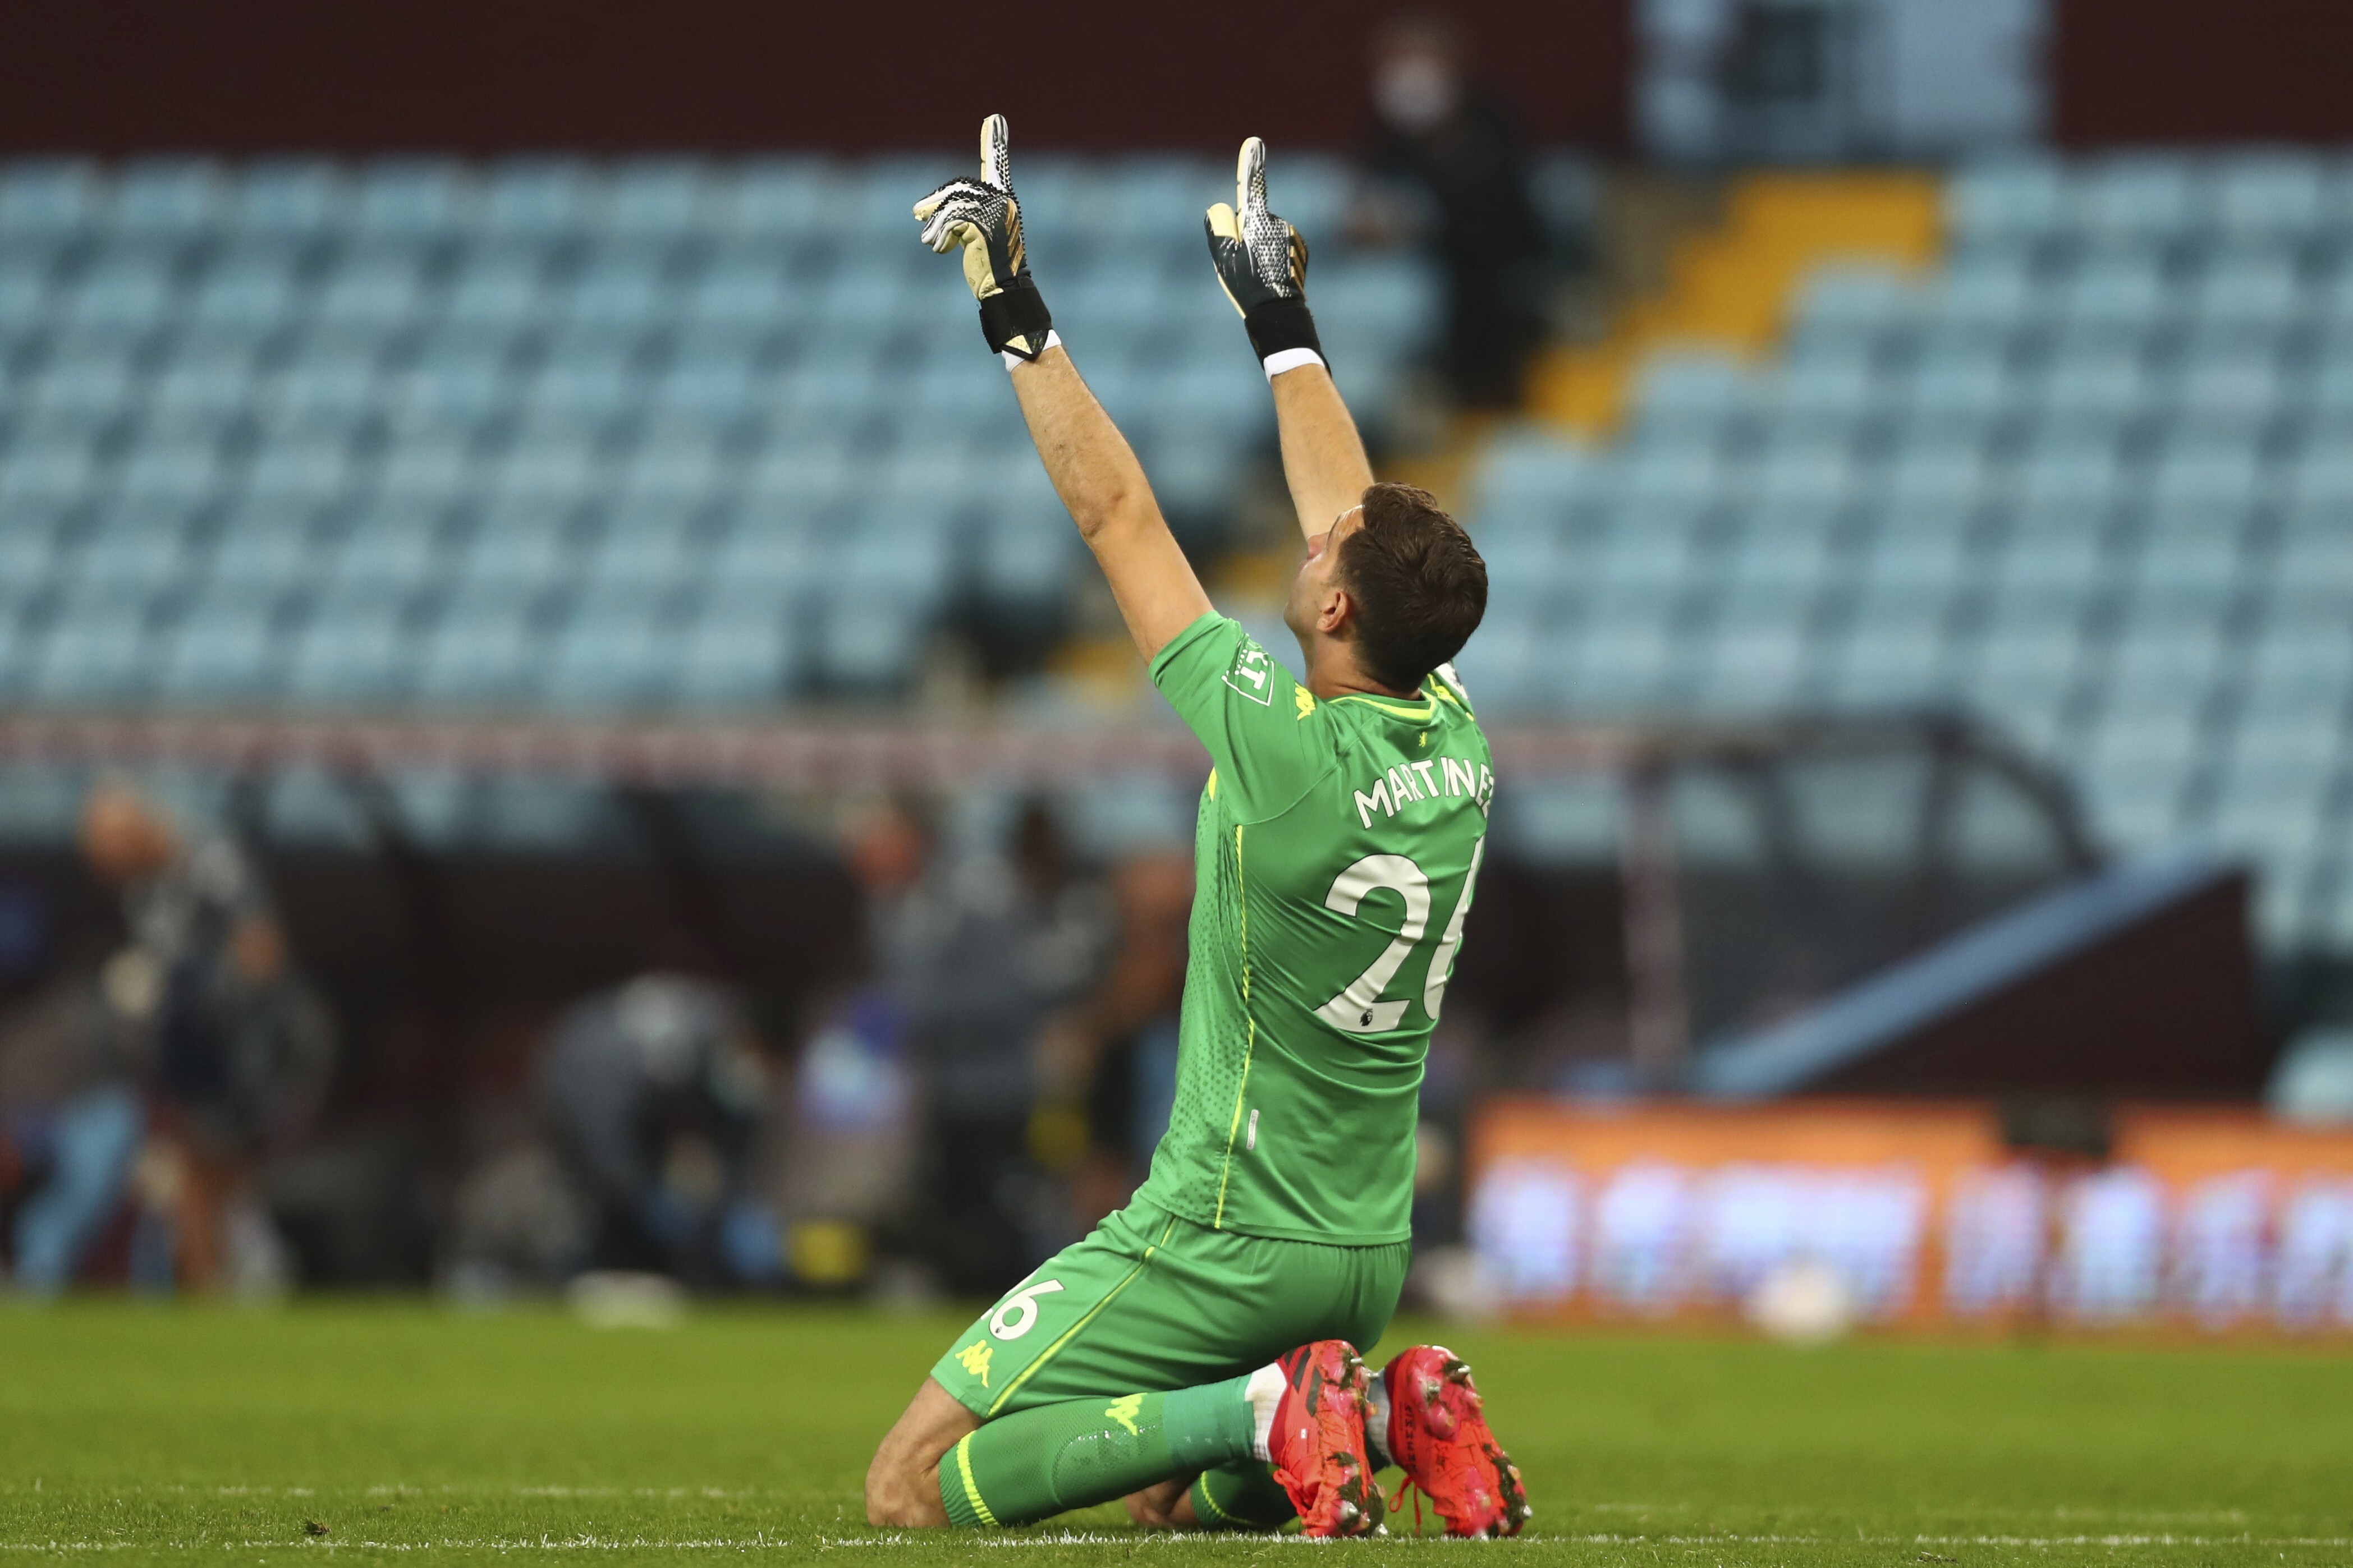 Aston Villa's goalkeeper Emiliano Martinez reacts at the end of the English Premier League match against Sheffield United. Photo: AP